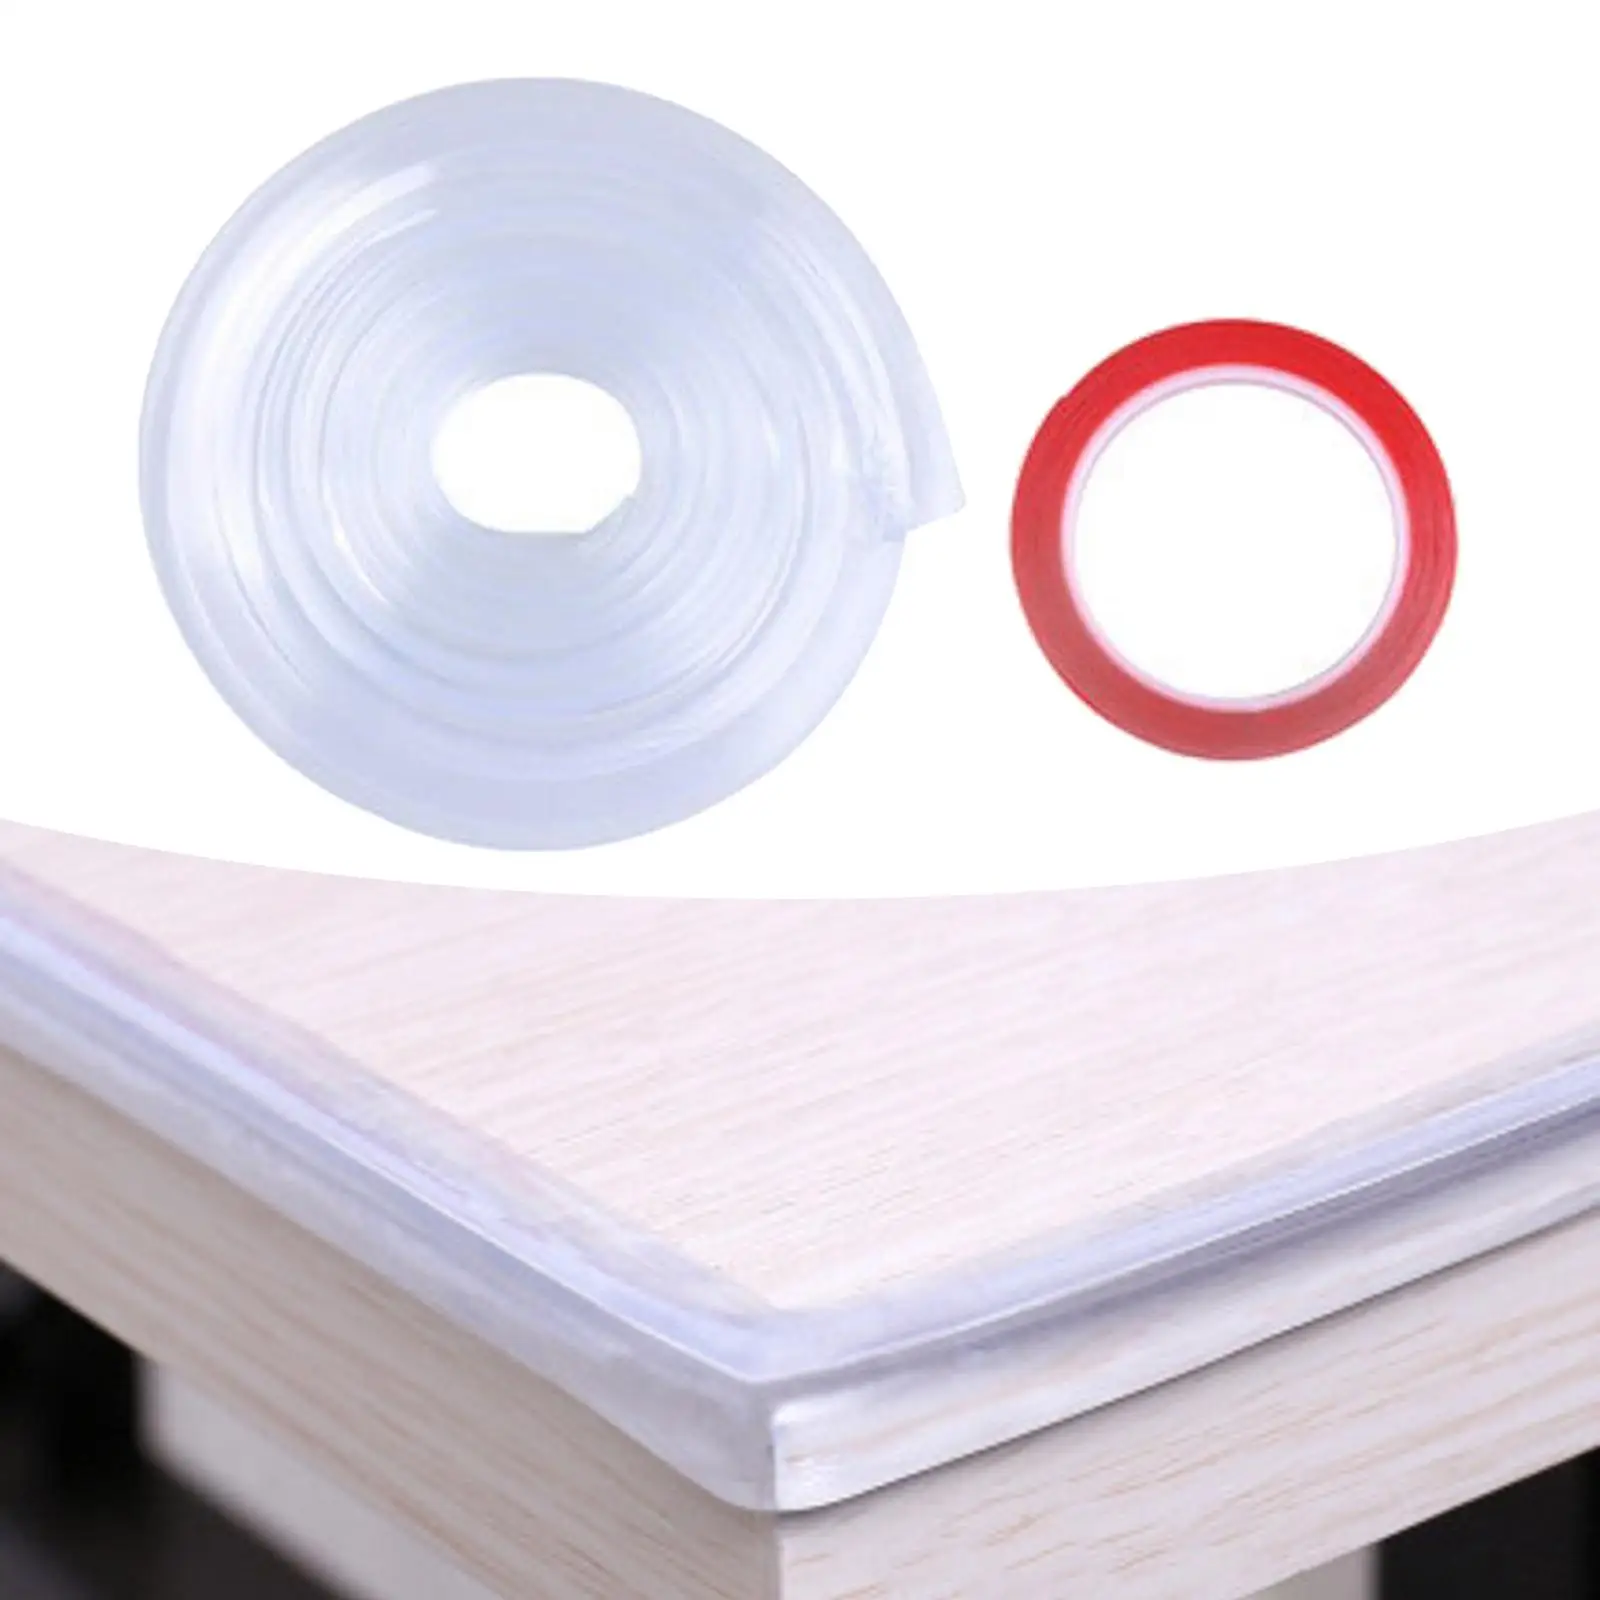 Silicone Edge Protector Strip Transparent Corner Protectors Edge Protection for Furniture Table Cabinets Sofa